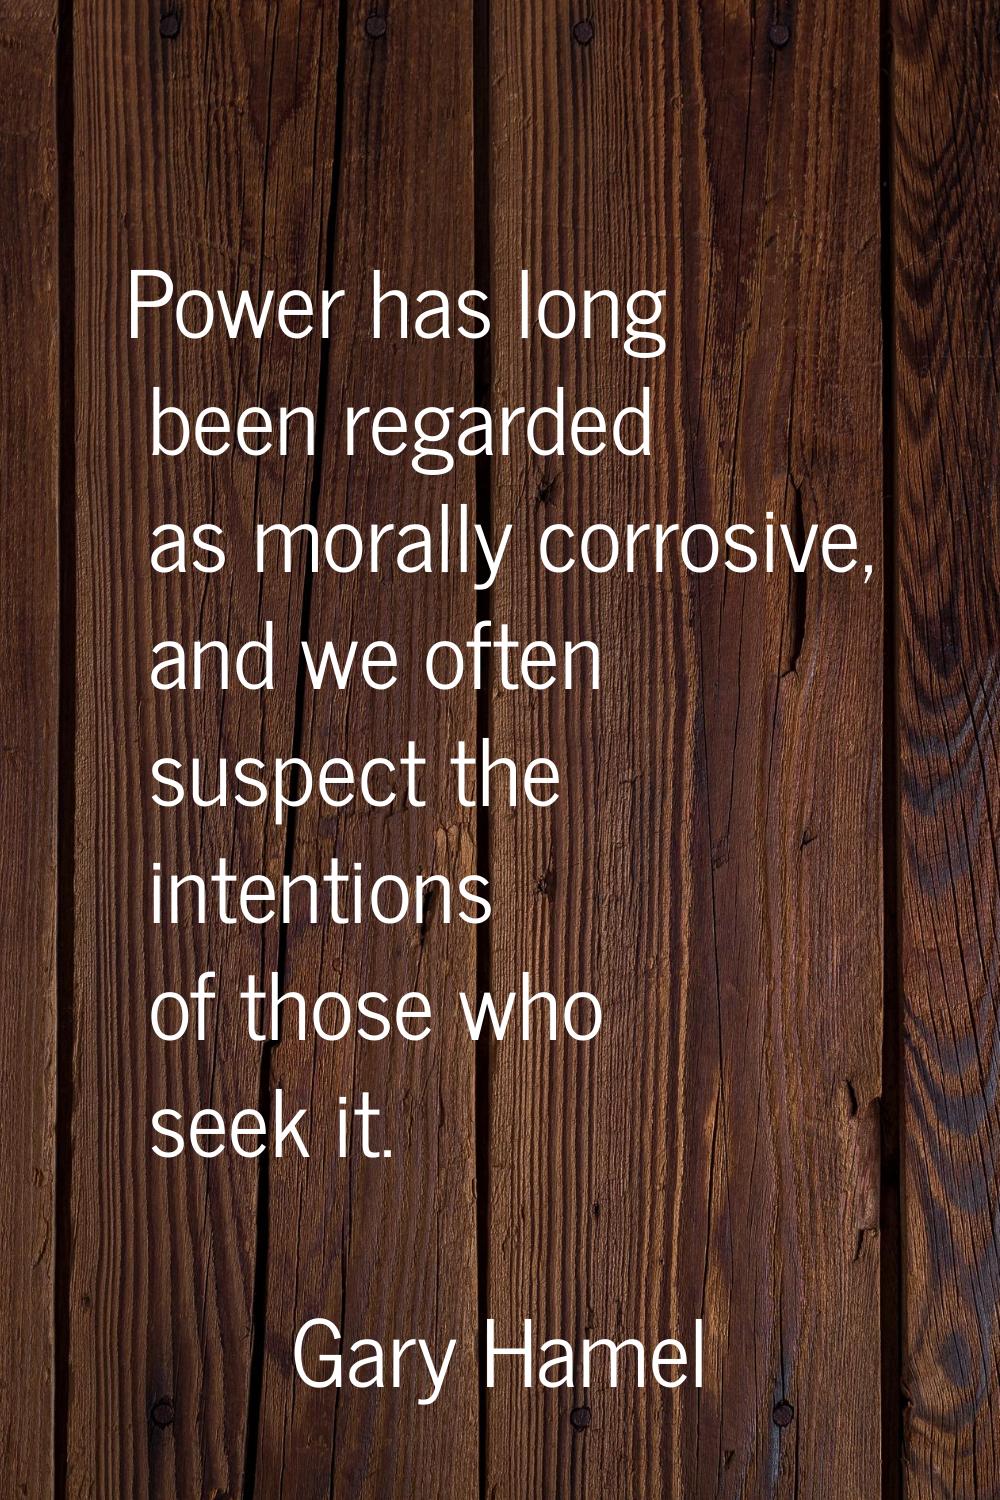 Power has long been regarded as morally corrosive, and we often suspect the intentions of those who